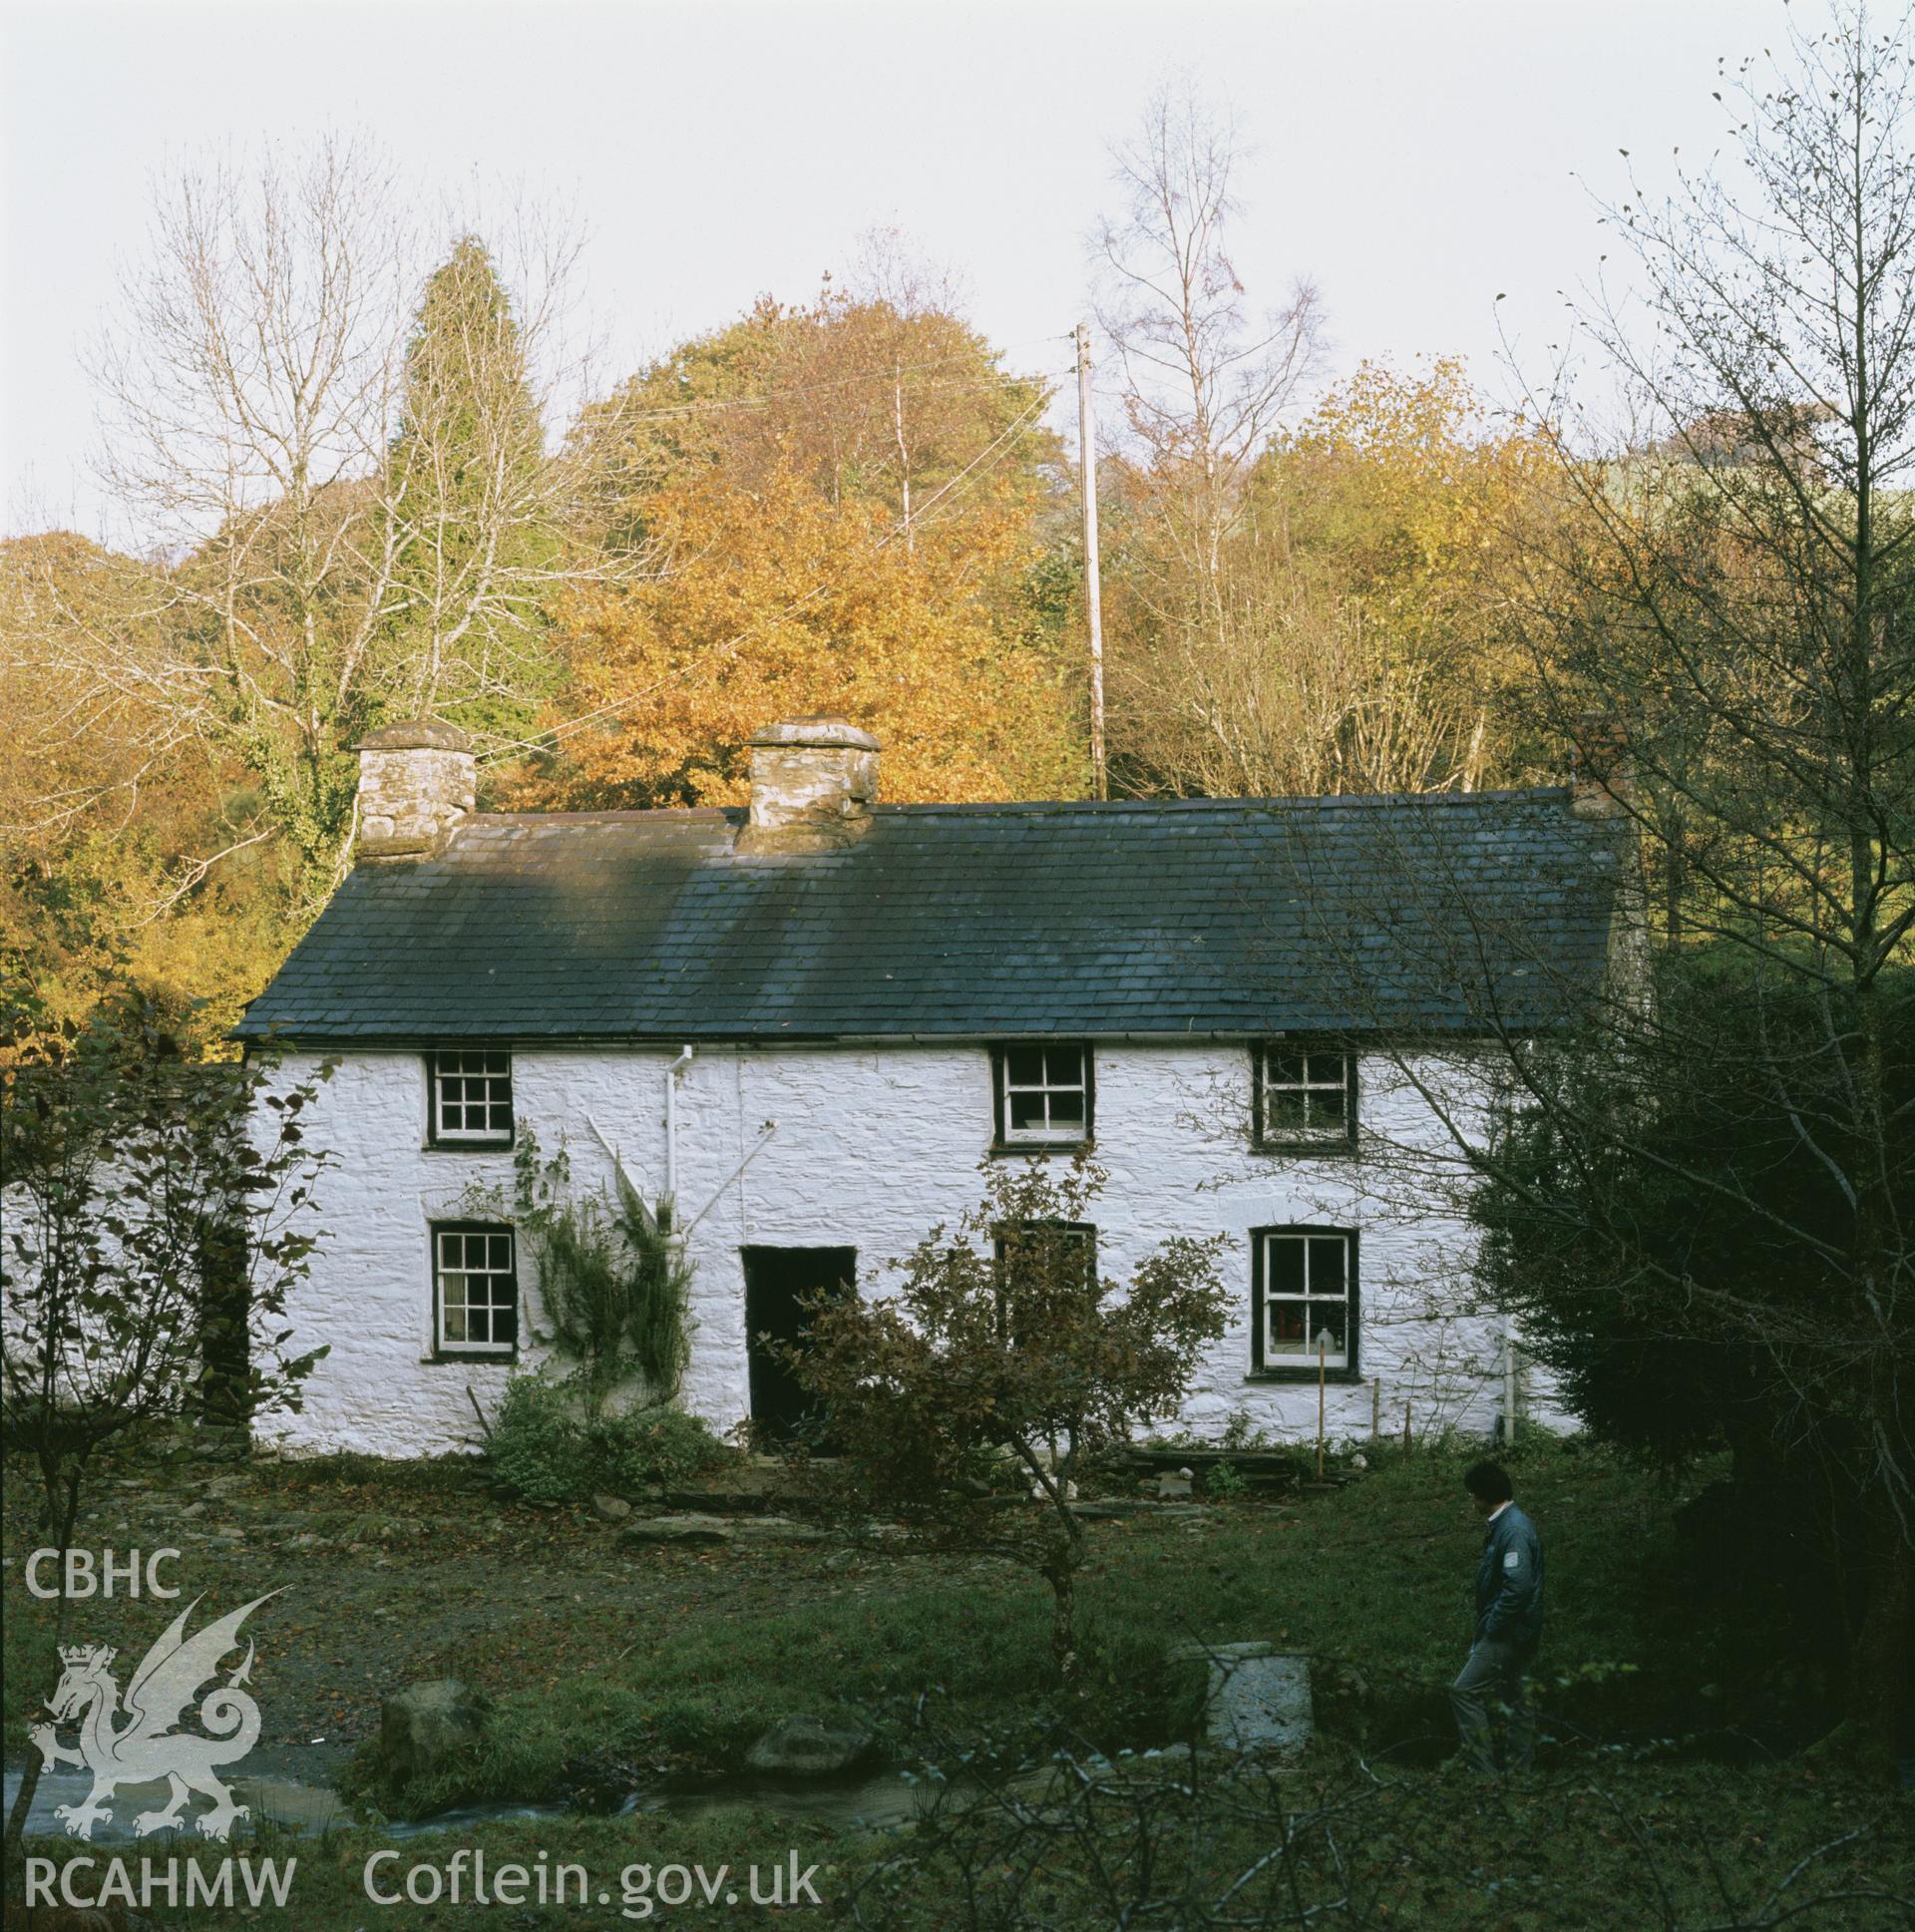 RCAHMW colour transparency of an exterior view of Wenffrwd, Ysgubor y Coed.